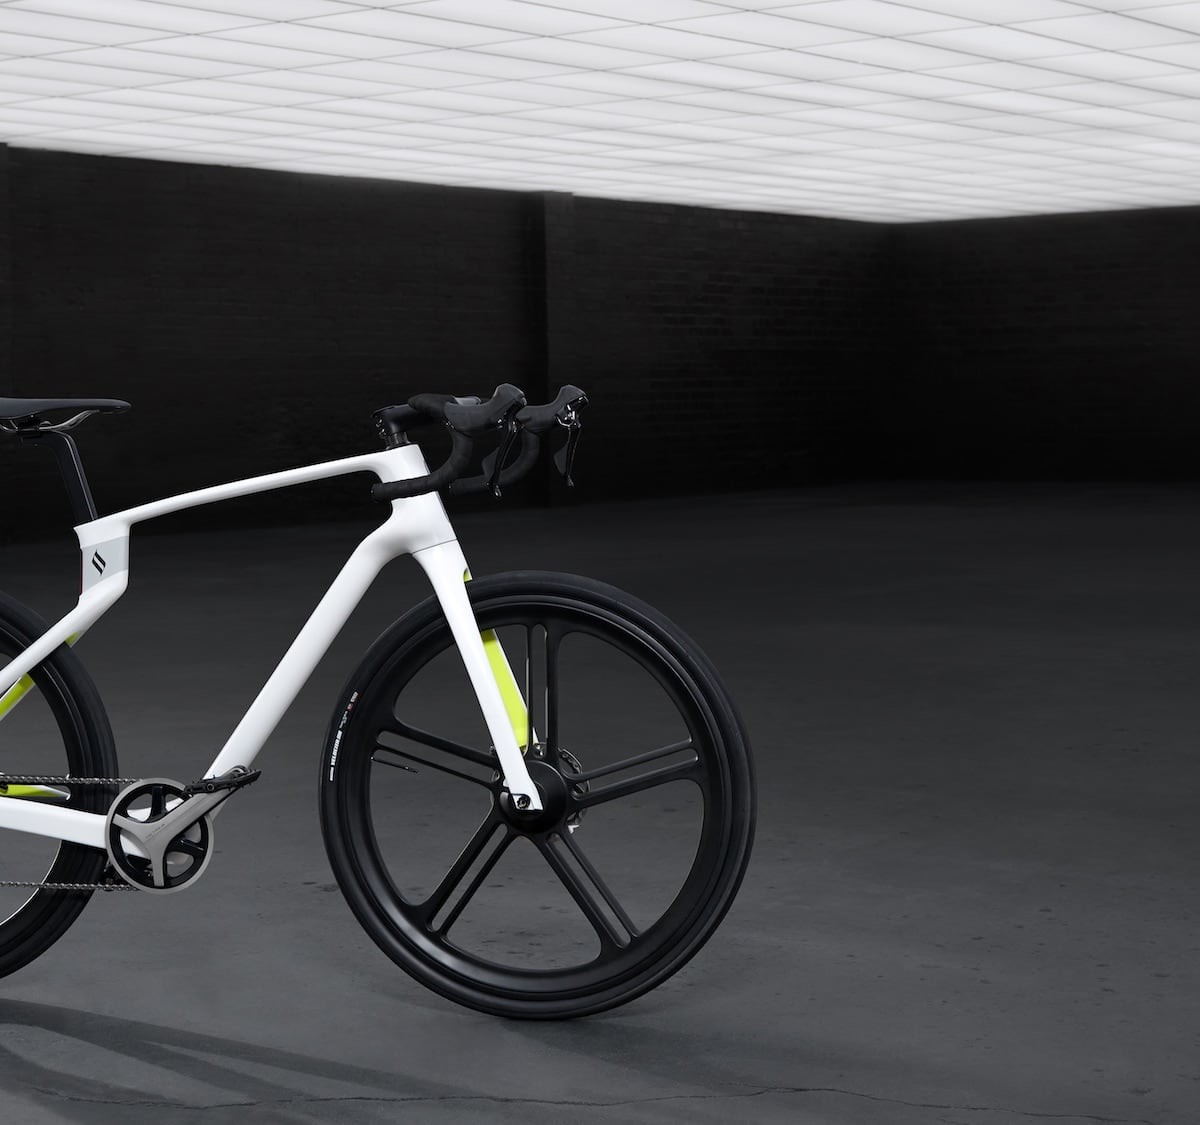 Superstrata Unibody Carbon Fiber Bicycle is both super strong and ultralight